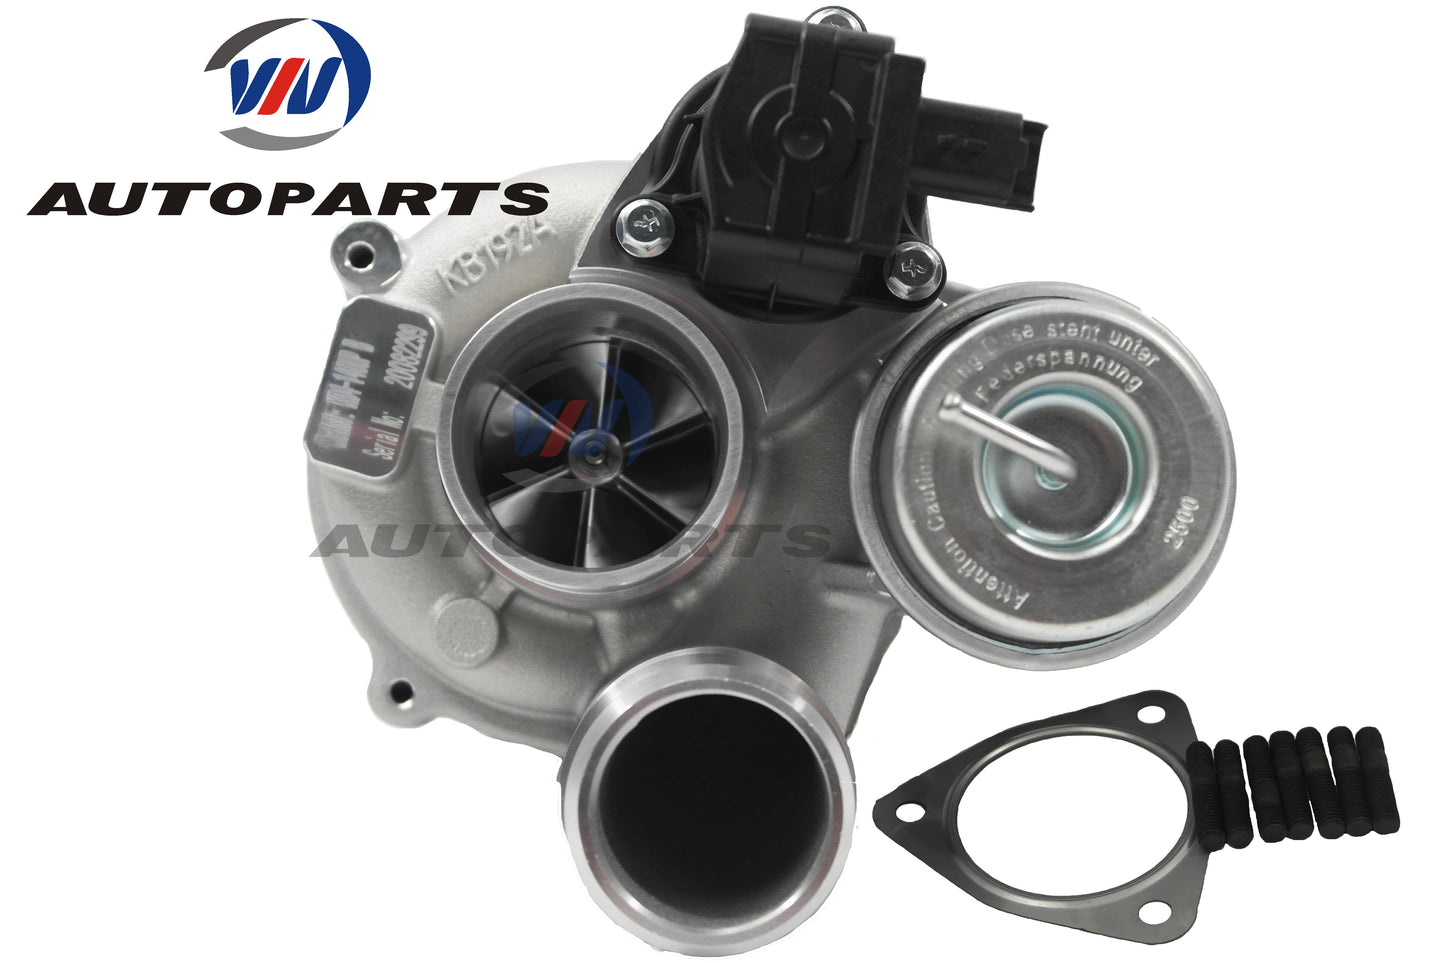 Upgrade K04 F21M Billet Turbo Charger For Mini Cooper R55 R56 R57 R58 R59 R60 R61 1.6T